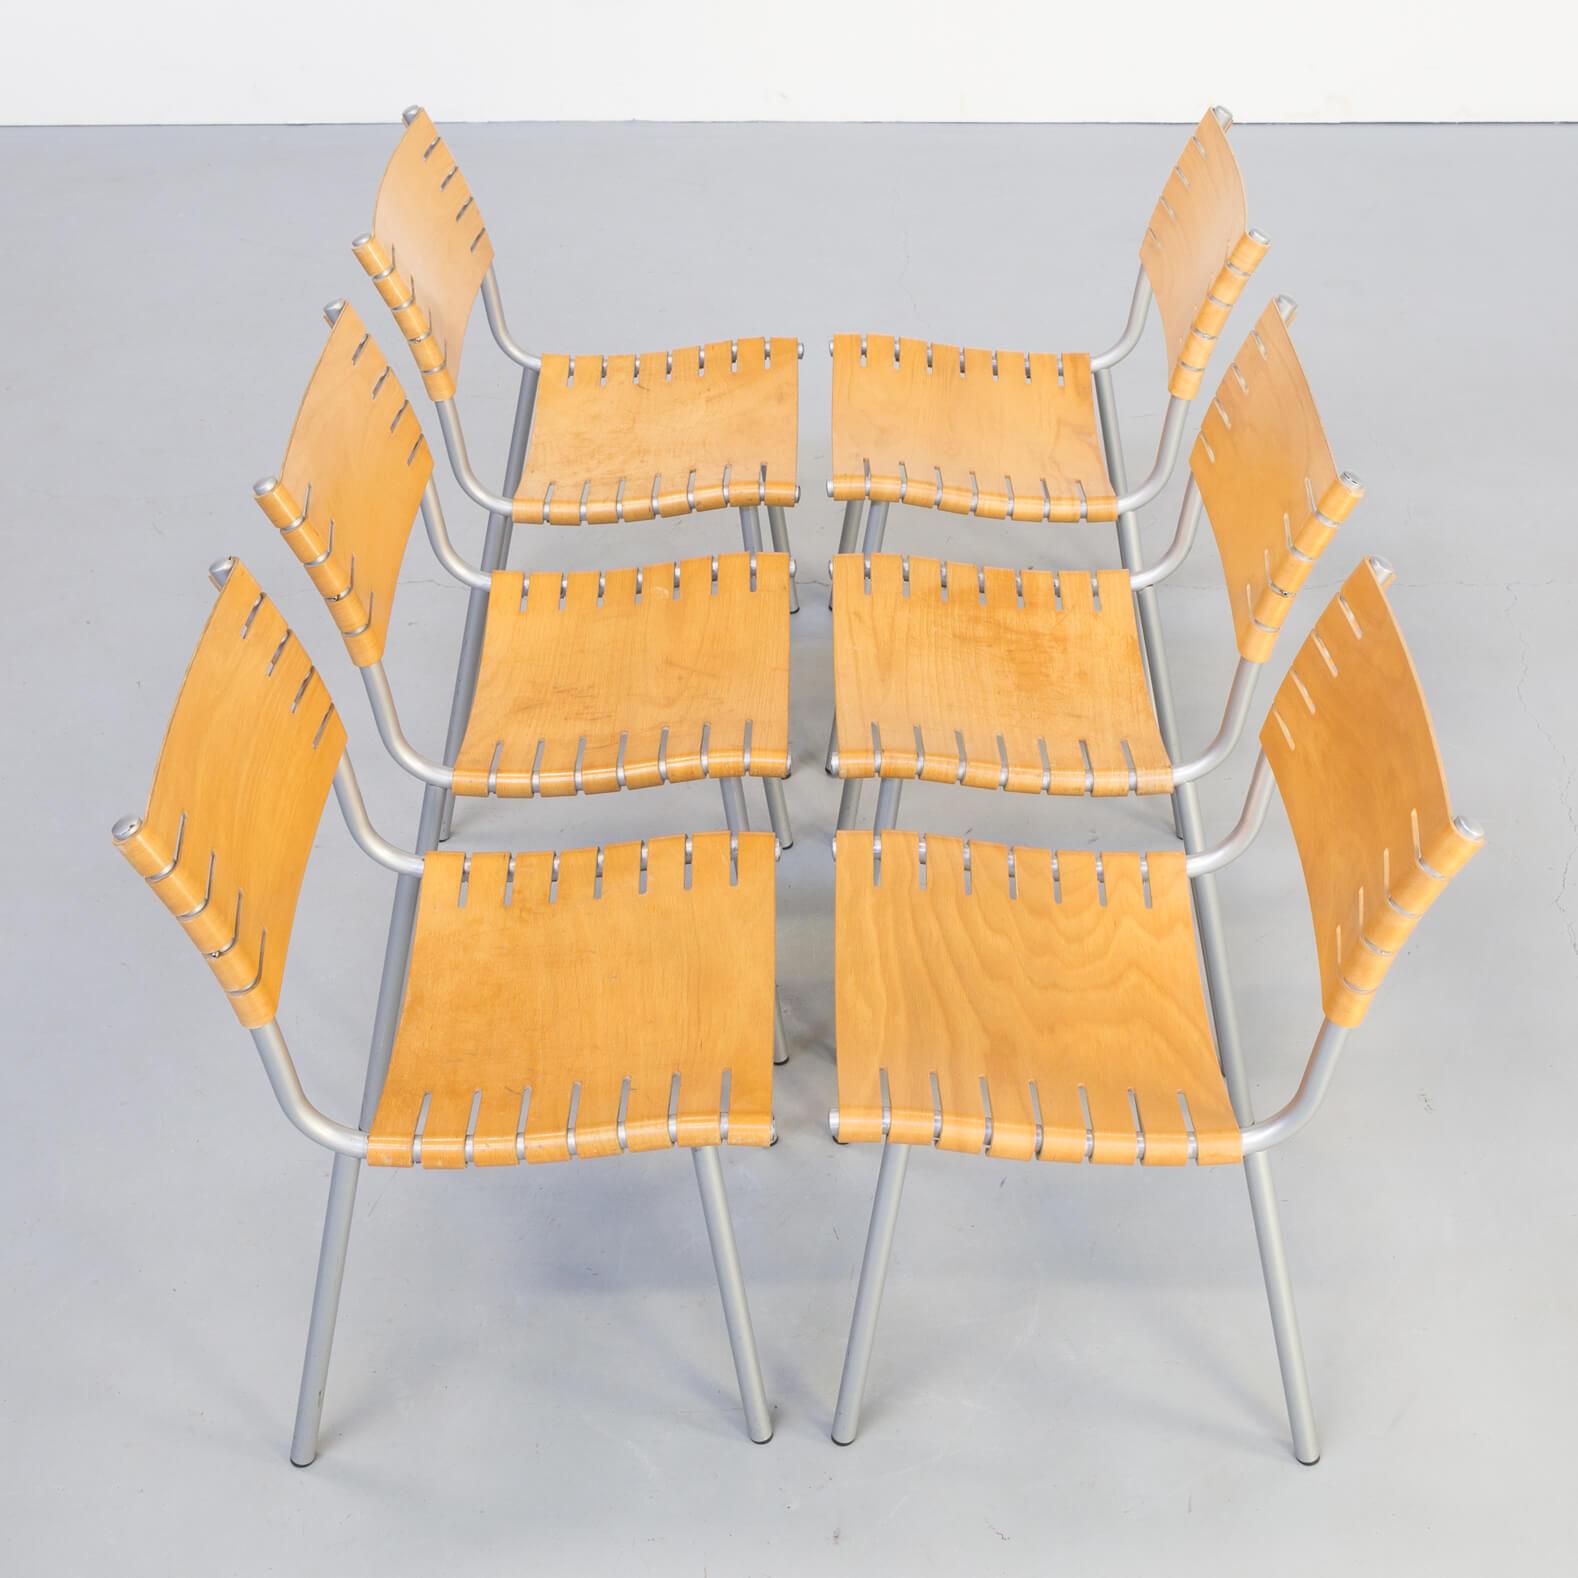 1990s Ruud Jan Kokke Dining Chair for Harvink Set of 6 For Sale 2